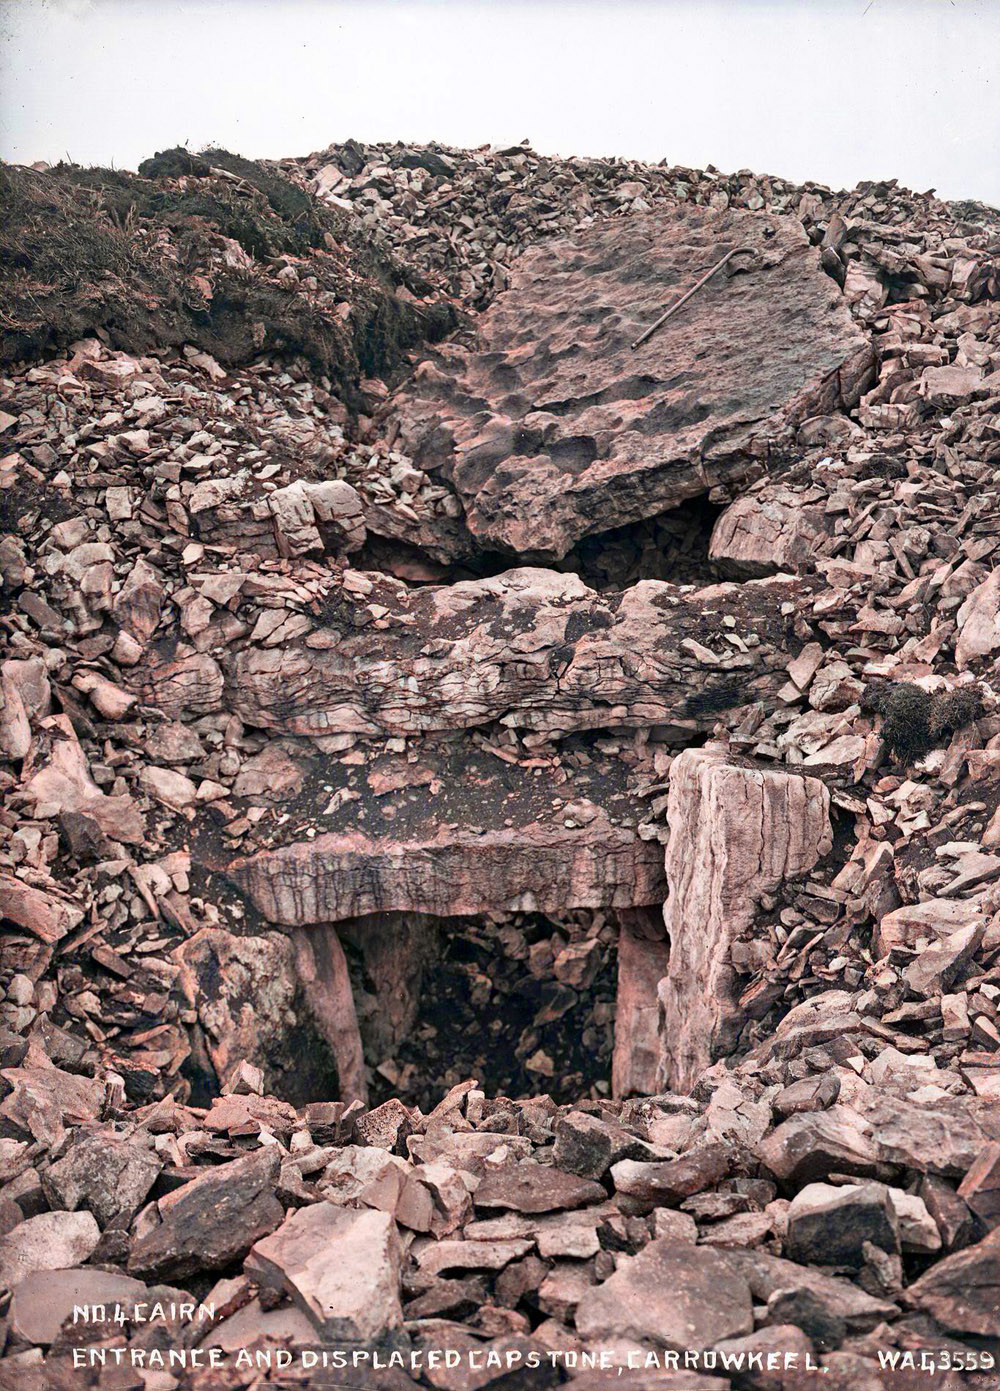 the entrance to Cairn F prior to digging in 1911. The large slab above the entrance was the capstone of the chamber, with a walking stick for scale. The workers smashed this slab because it was too heavy to lift.